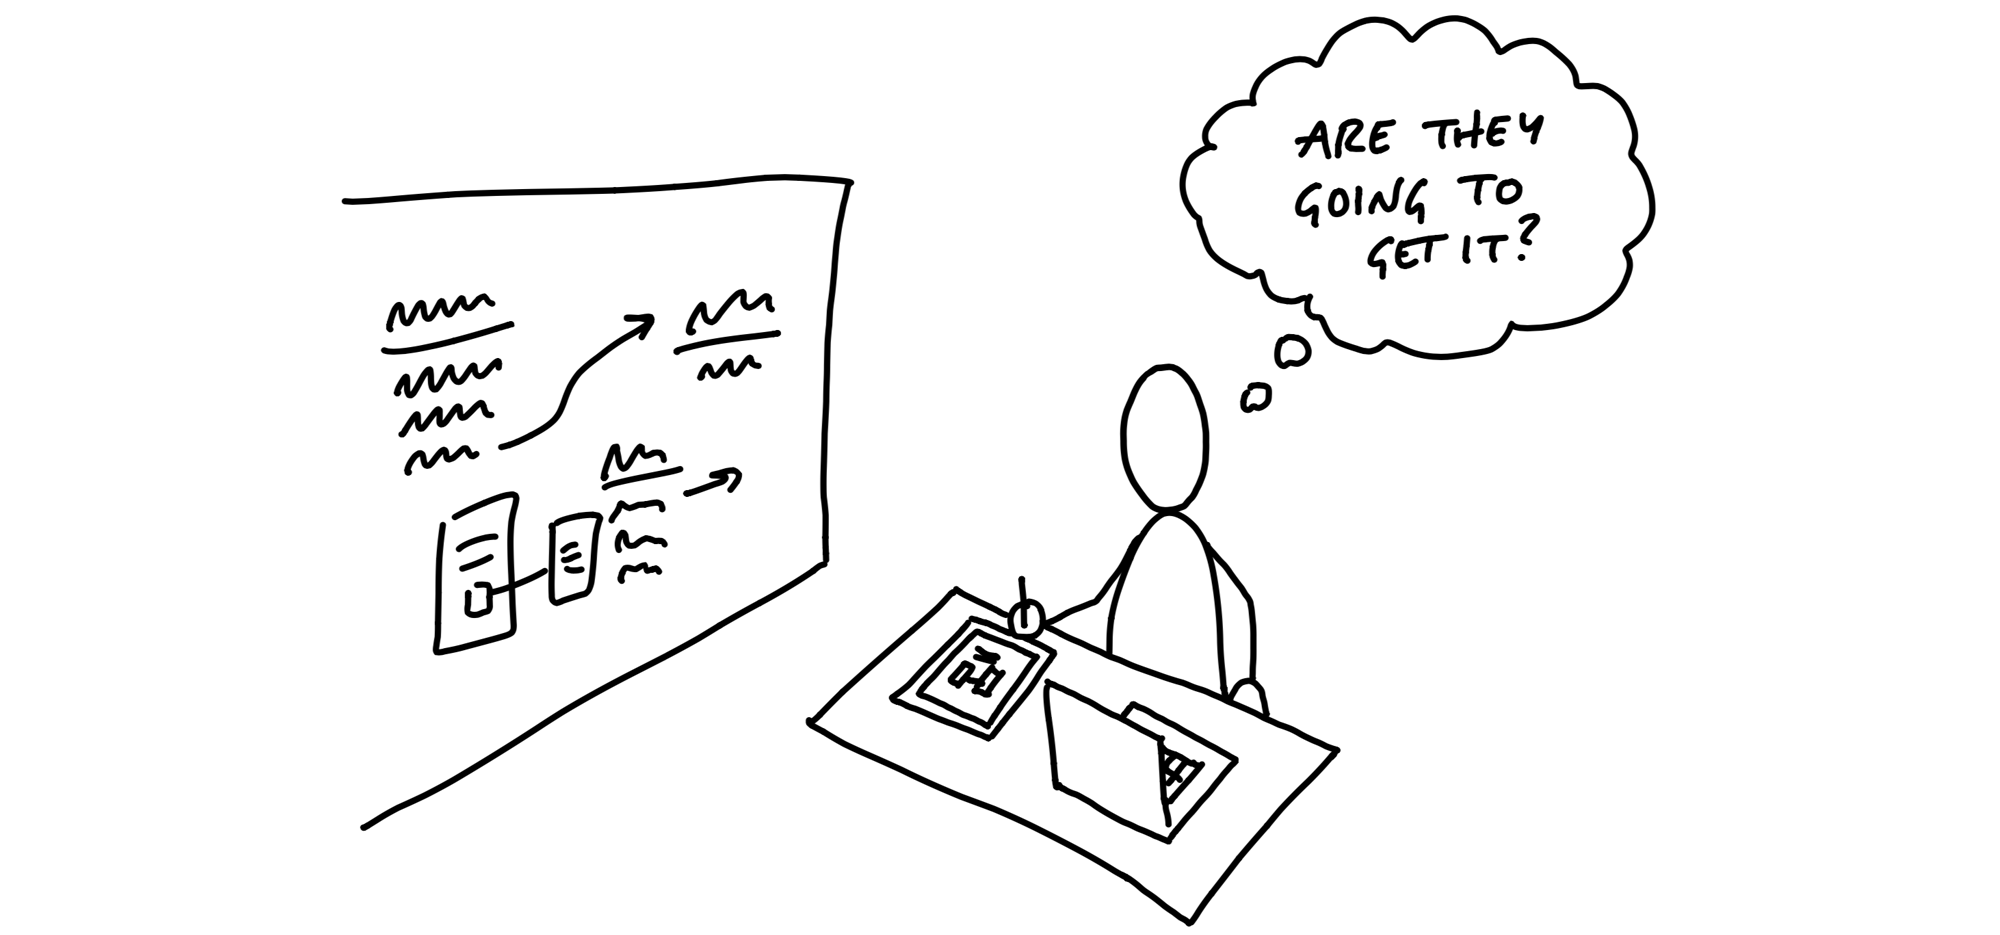 Cartoon. A person stands at a desk. To their right is a whiteboard with a breadboard and fat marker sketch. At the table in front of them is an open laptop and a tablet with a fat marker sketch drawn on it. The person holds a stylus above the tablet while thinking: Are they going to get it?